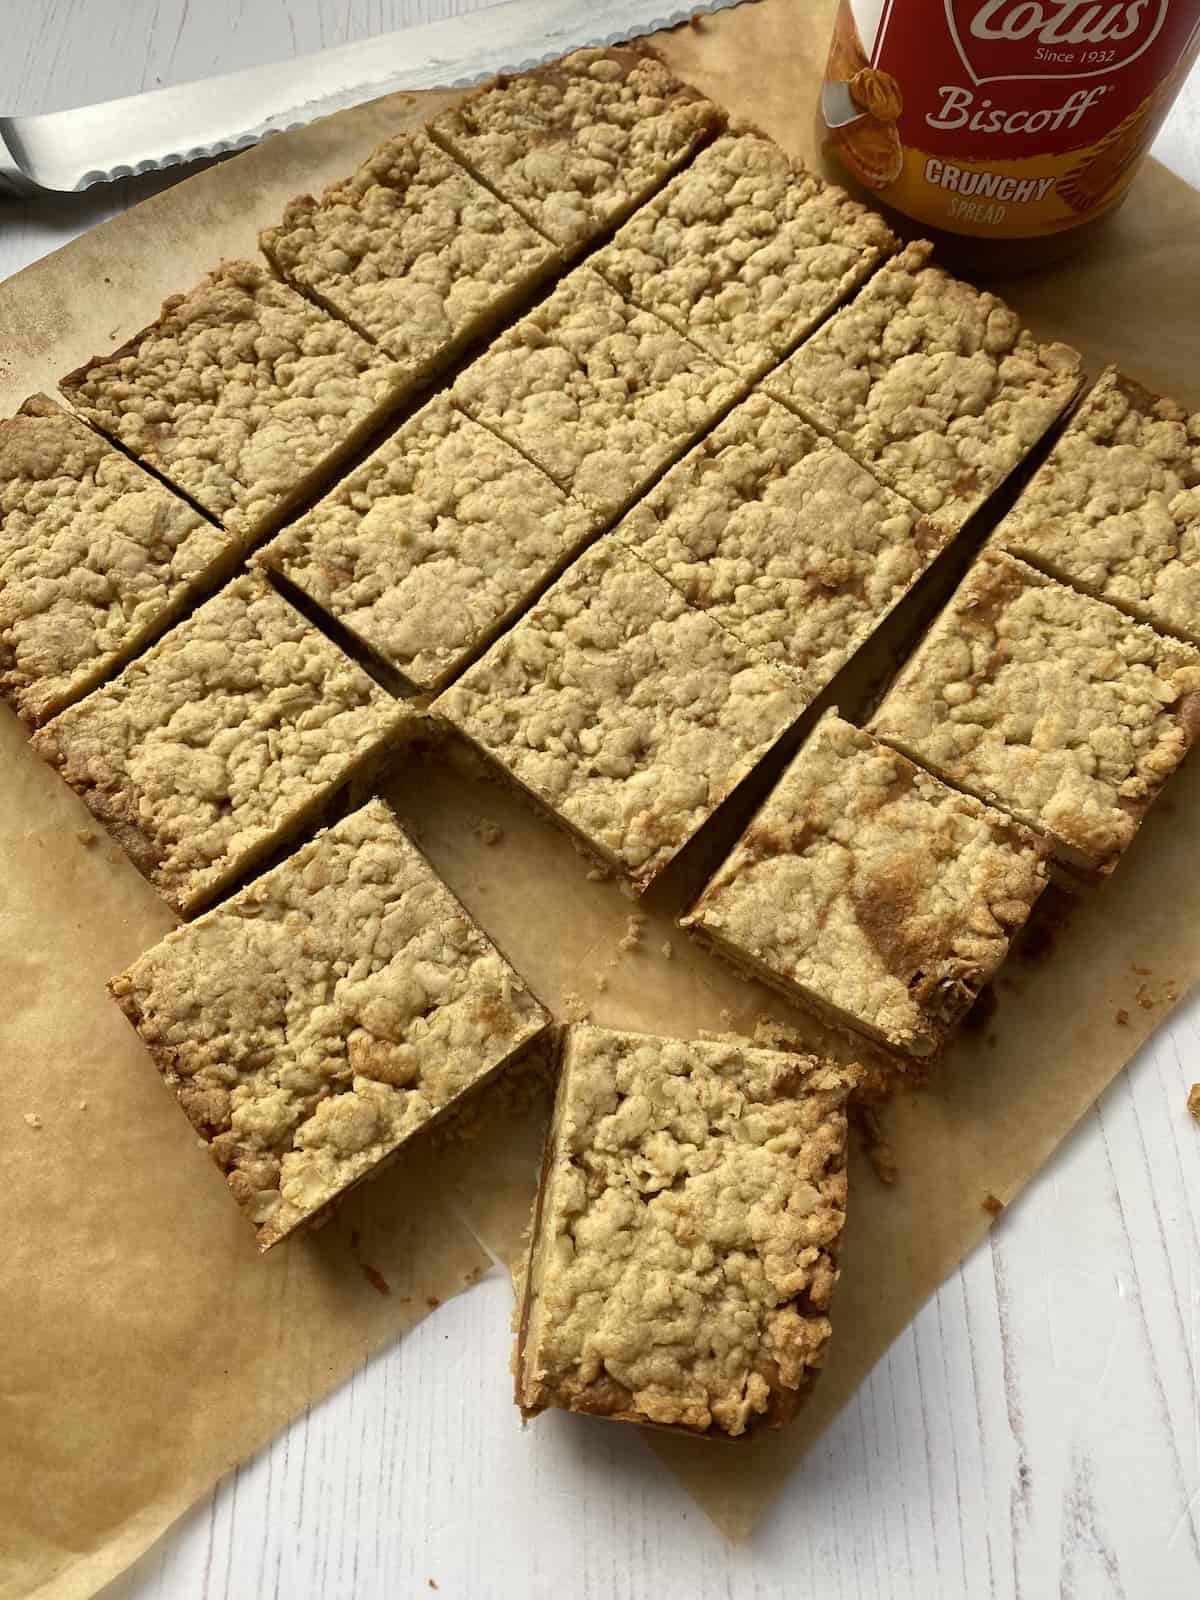 Slices of Biscoff Bites on baking parchment.